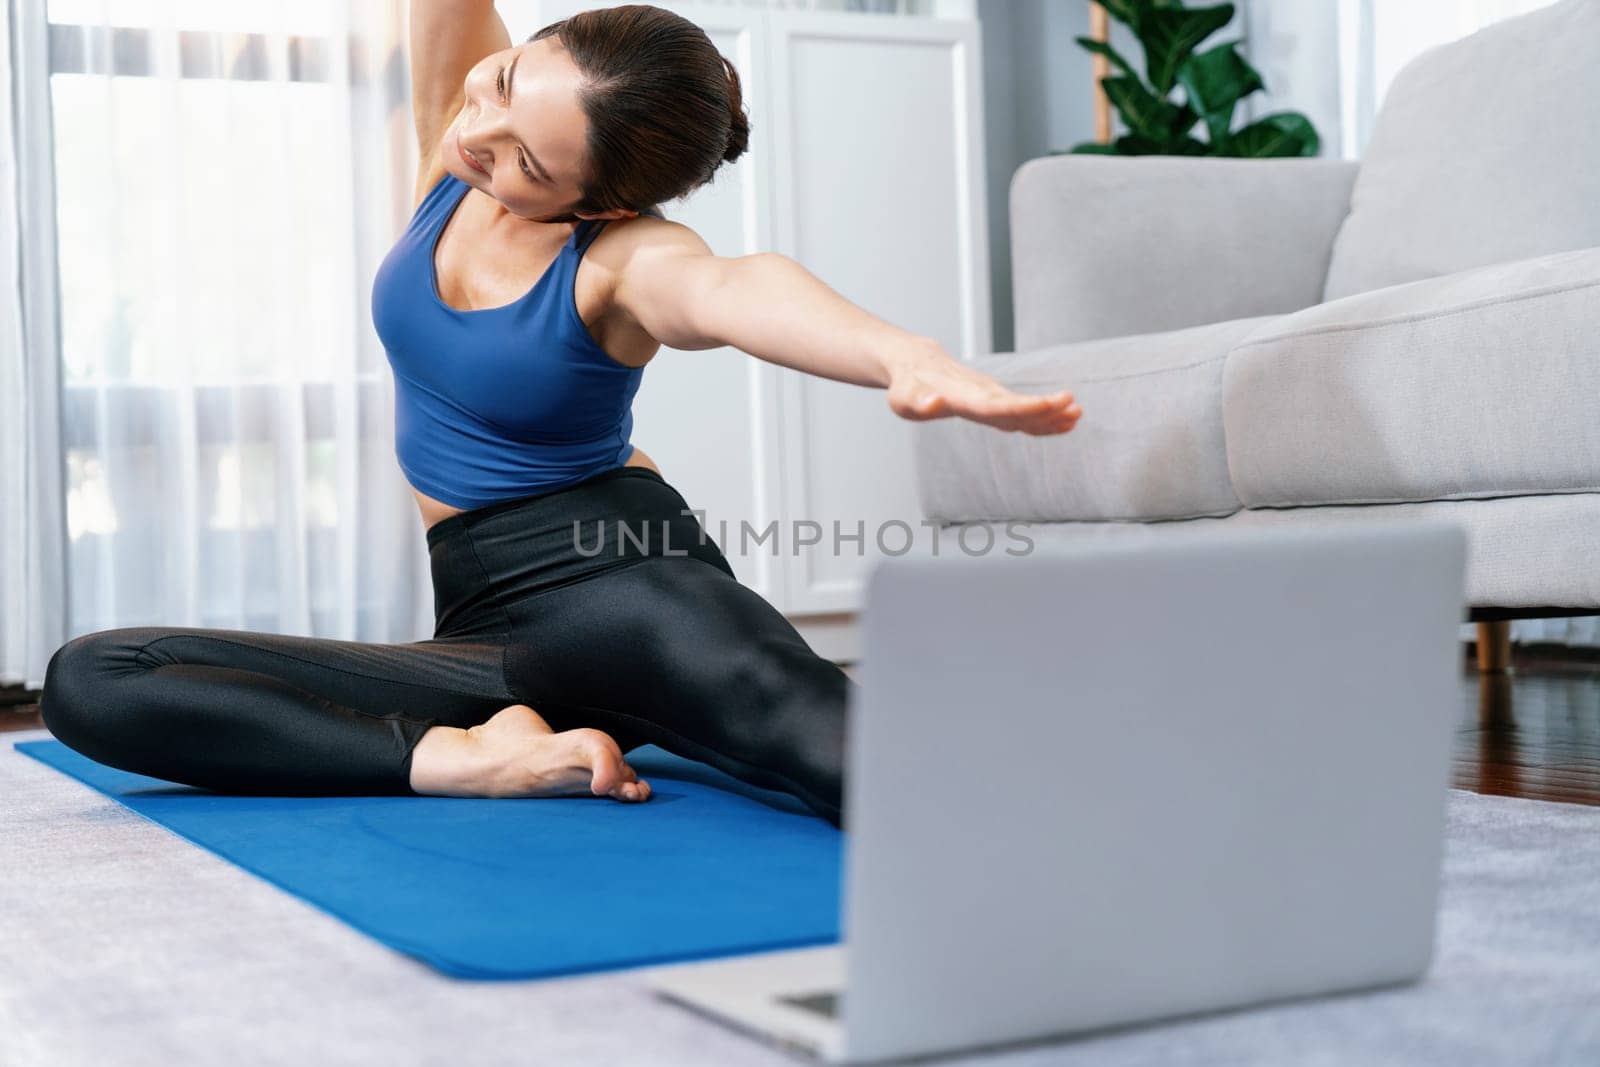 Focused laptop on the floor showing online exercise training video. Vigorous by biancoblue